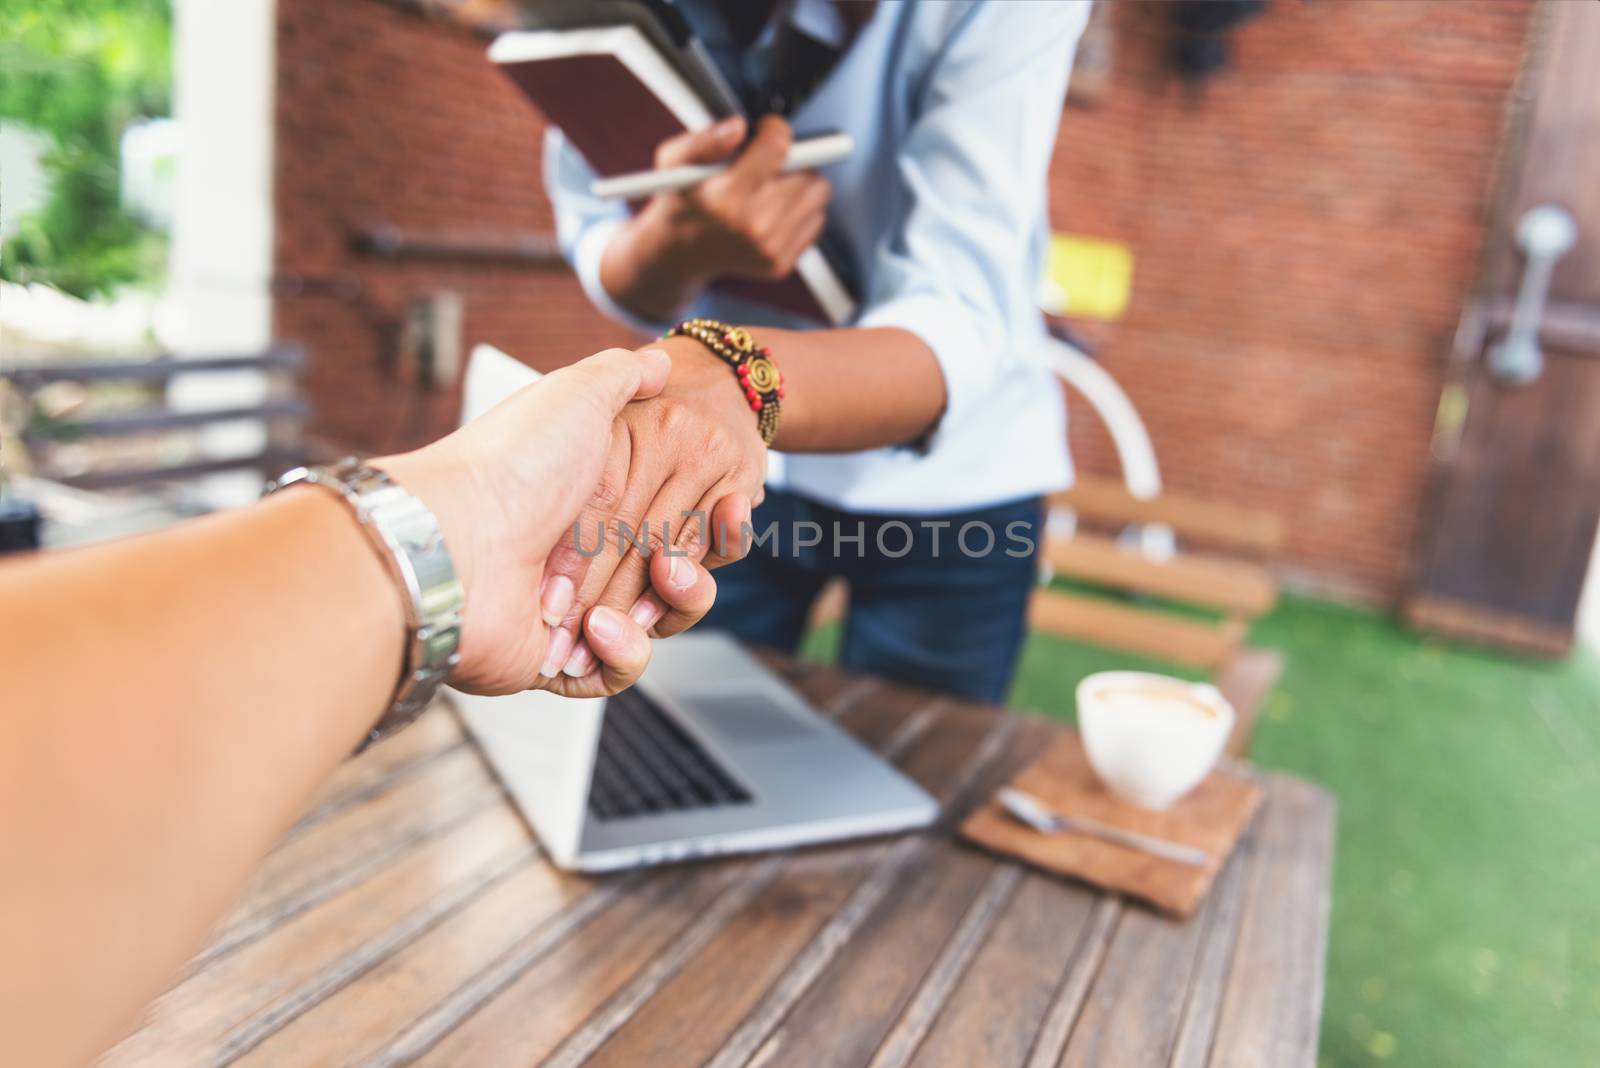 Photos of Asian women who are shaking hands,Focus on hand by PhairinThee